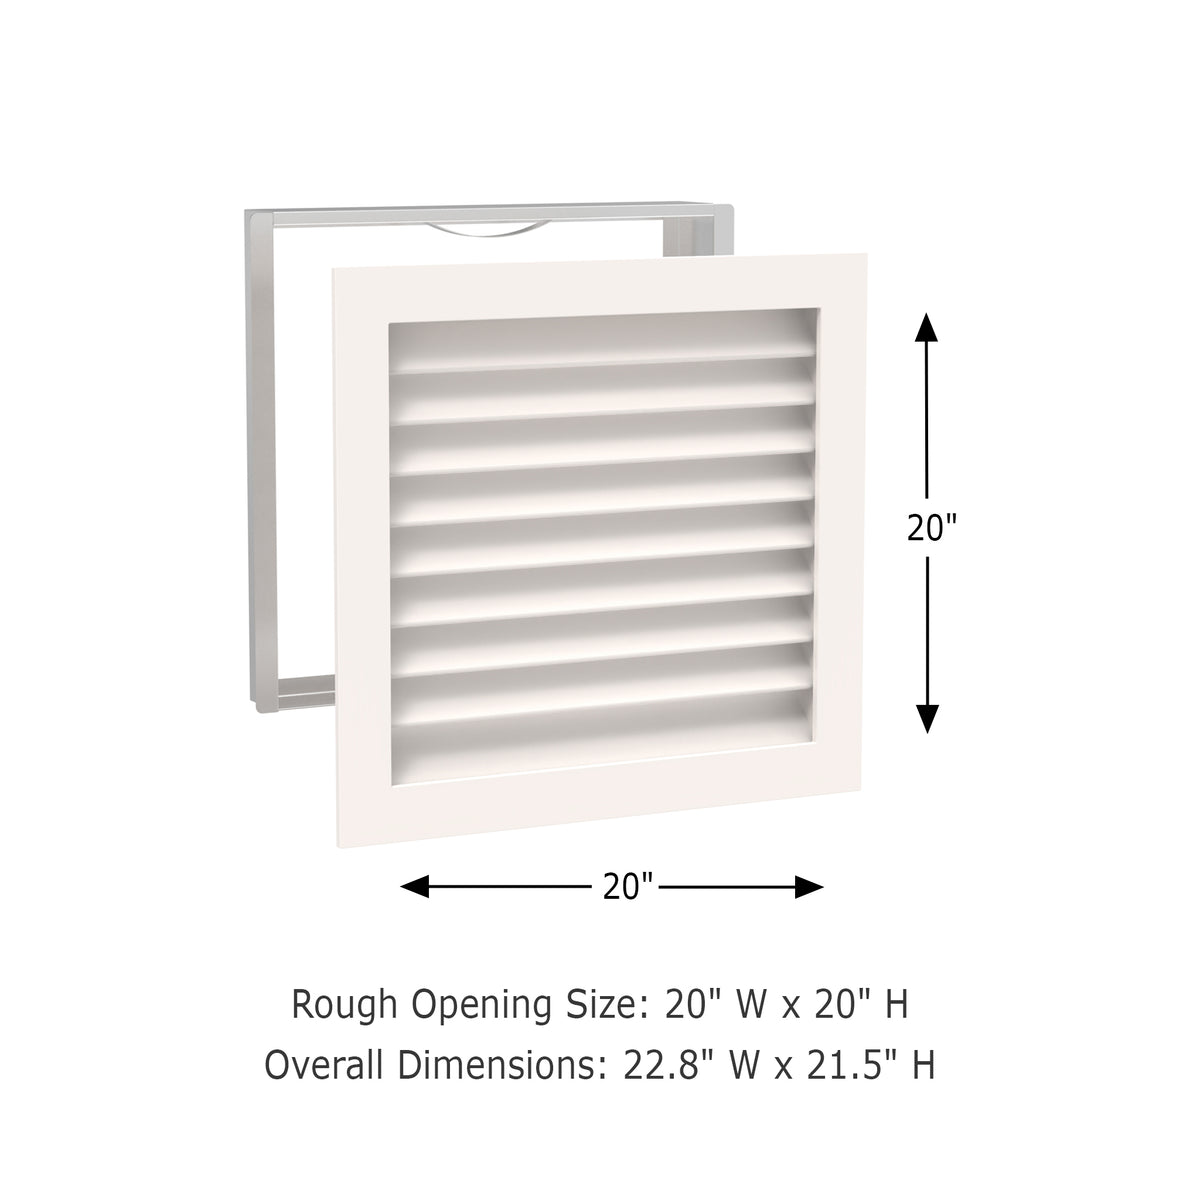 Worth Home Products - decorative wood AC vent covers luxury return vent - Primed Wood Louvers 20x20